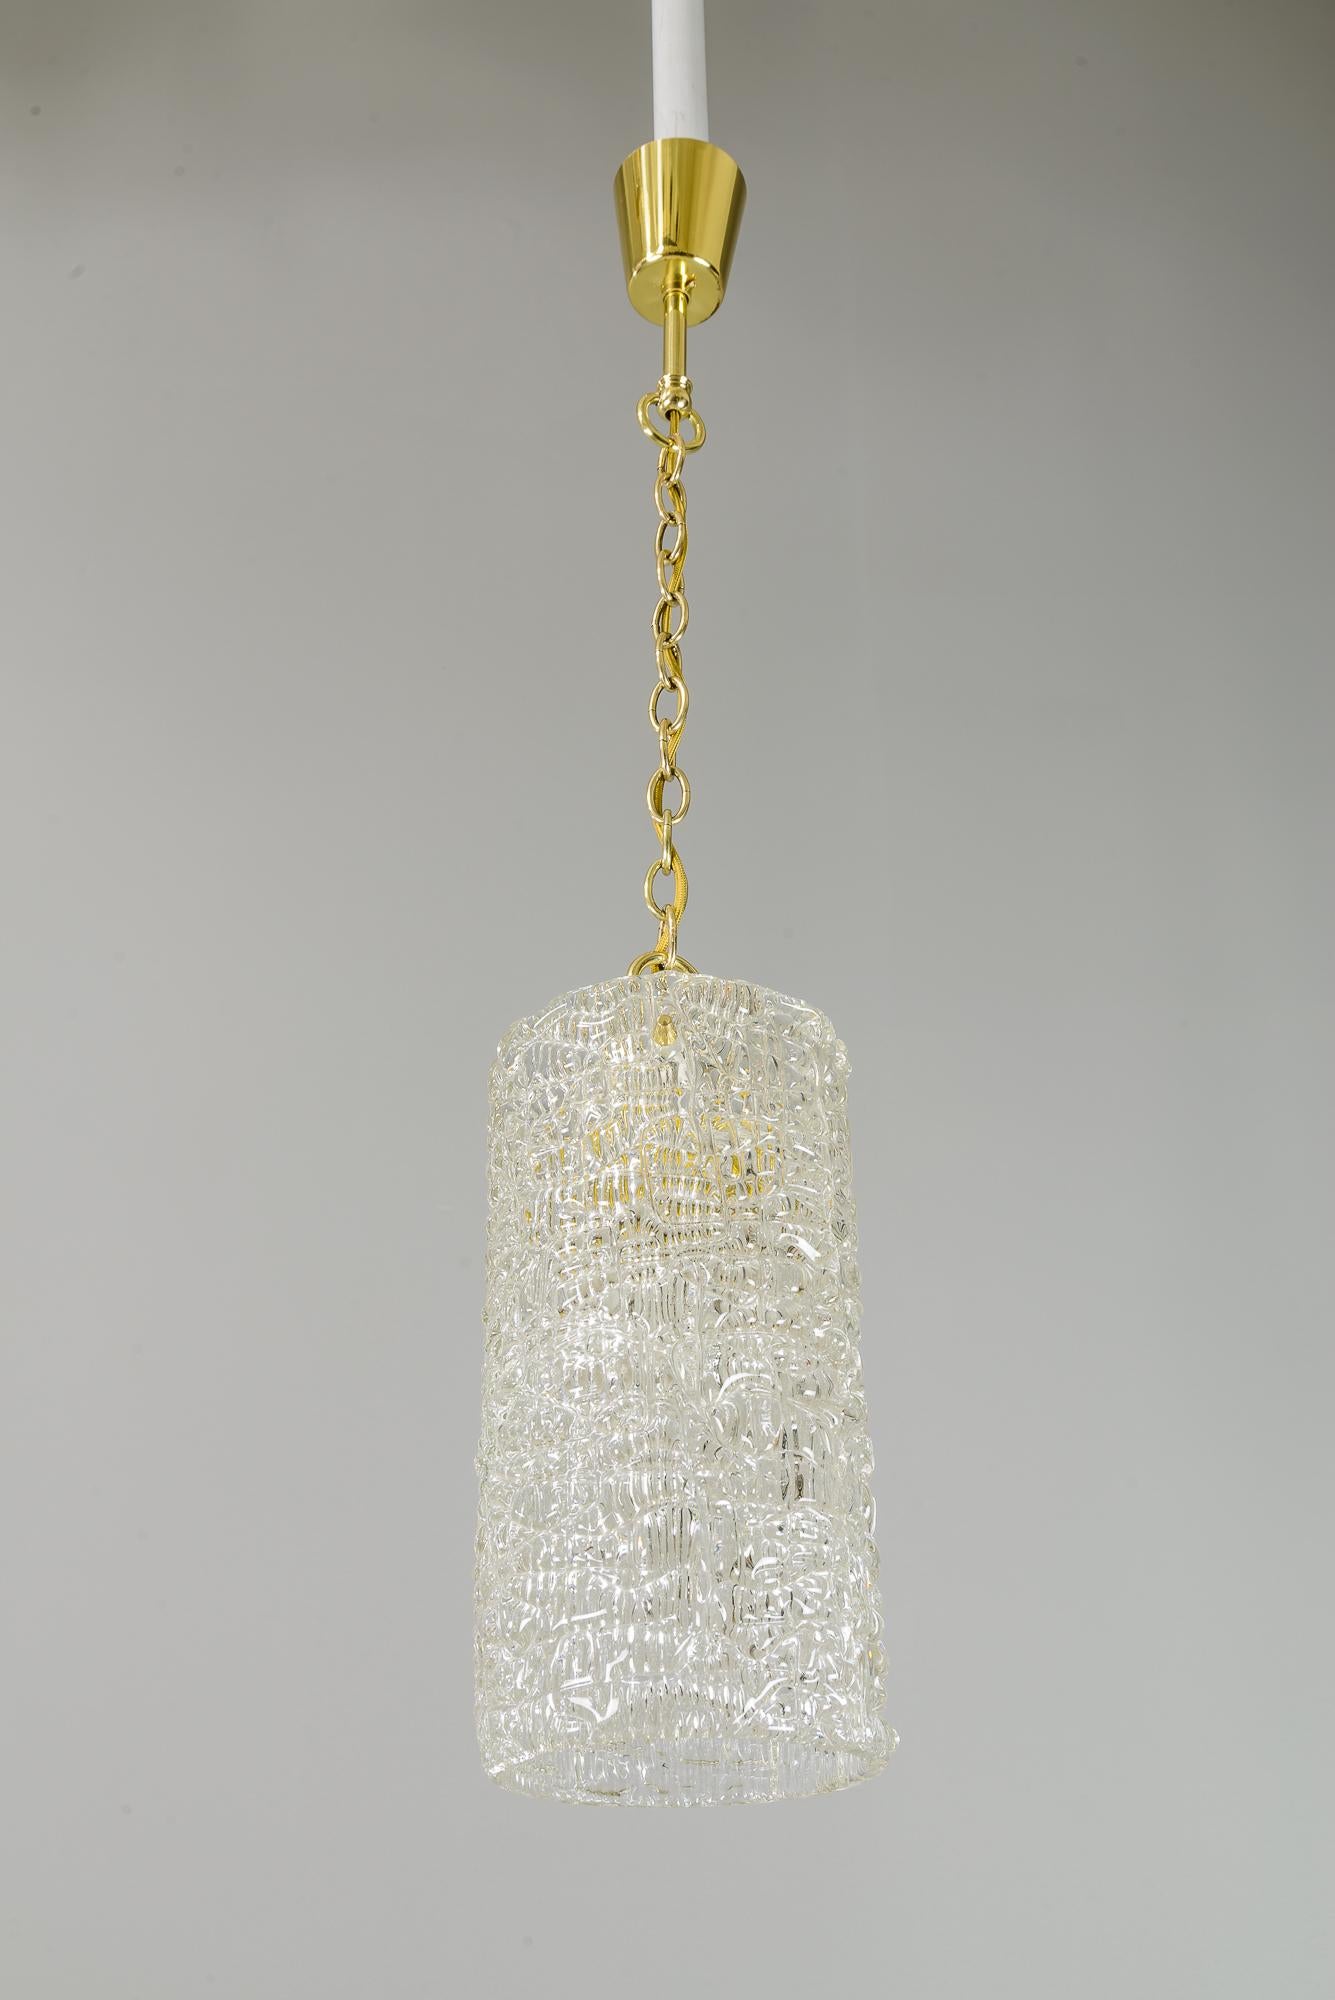 4 Kalmar Pendants circa 1950s with Textured Glass In Good Condition For Sale In Wien, AT